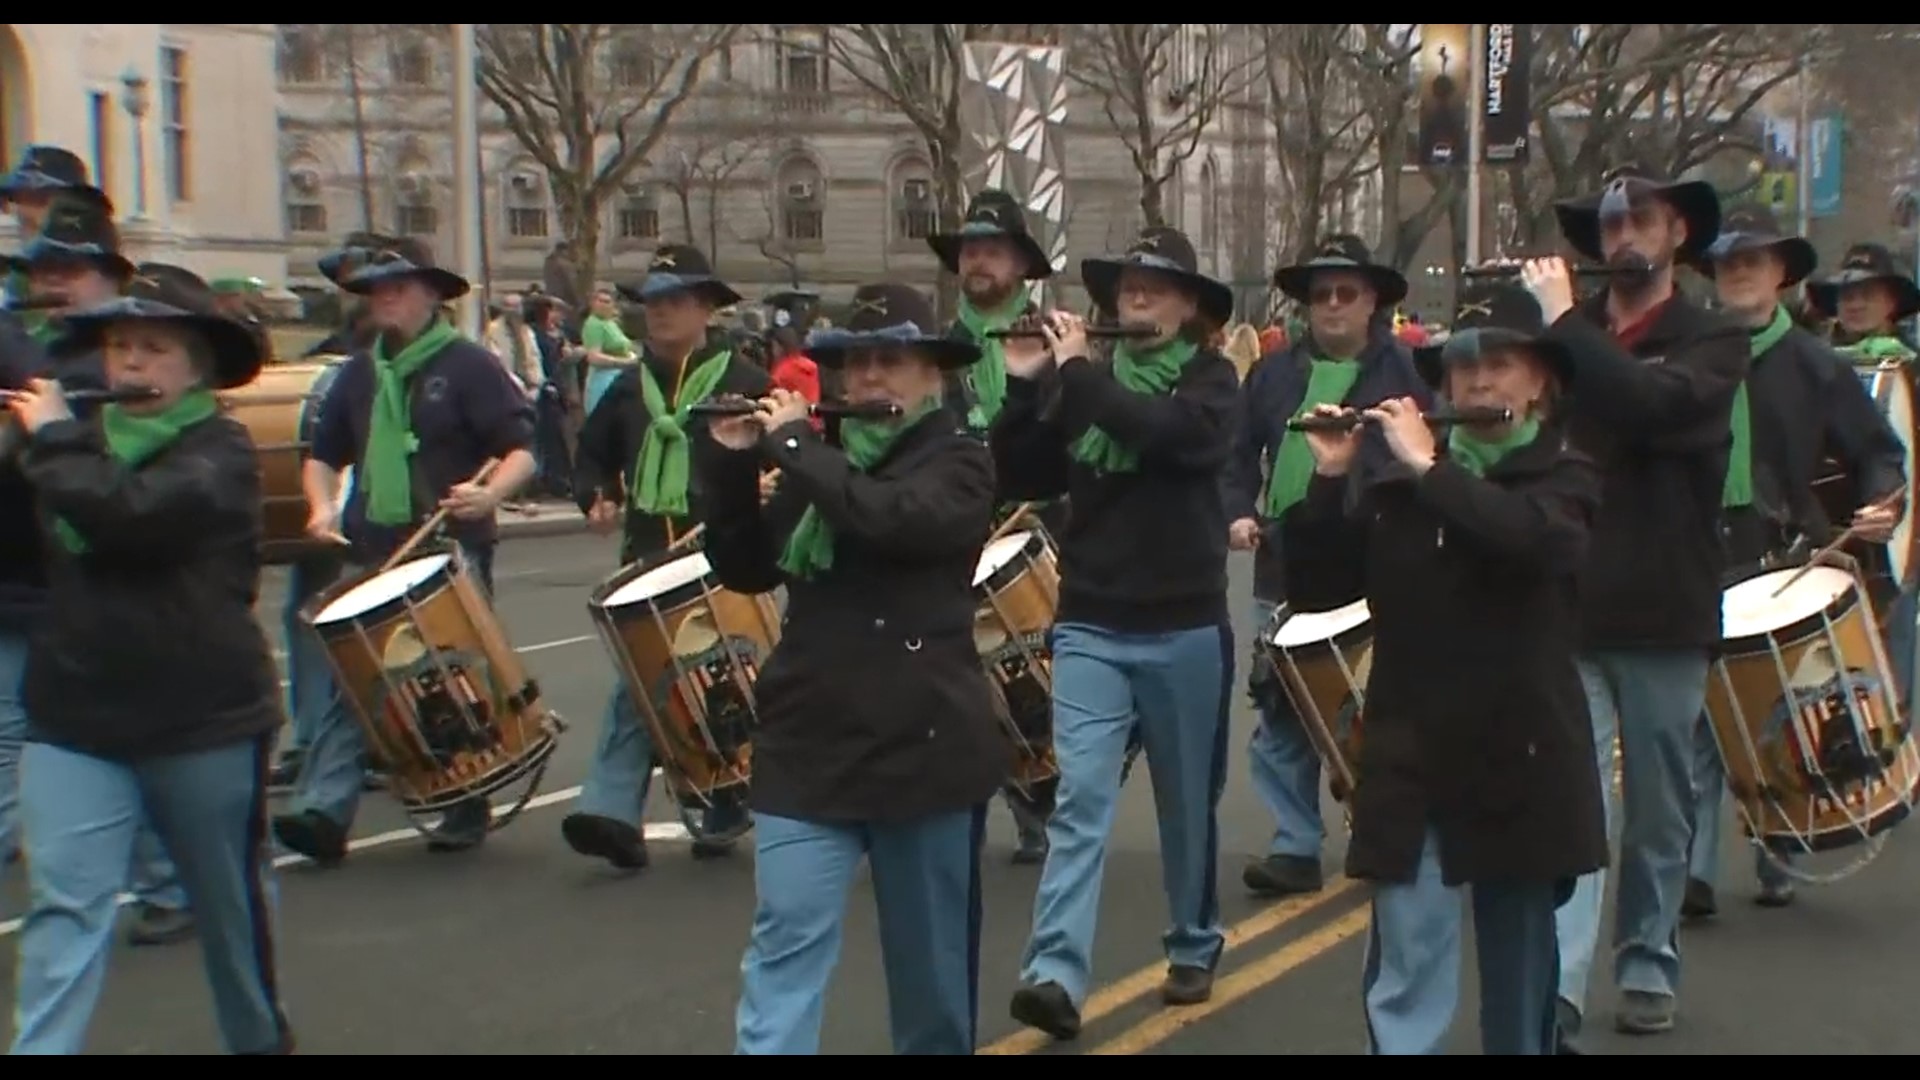 Crowds lined the streets of downtown Hartford to welcome back the parade after two years.